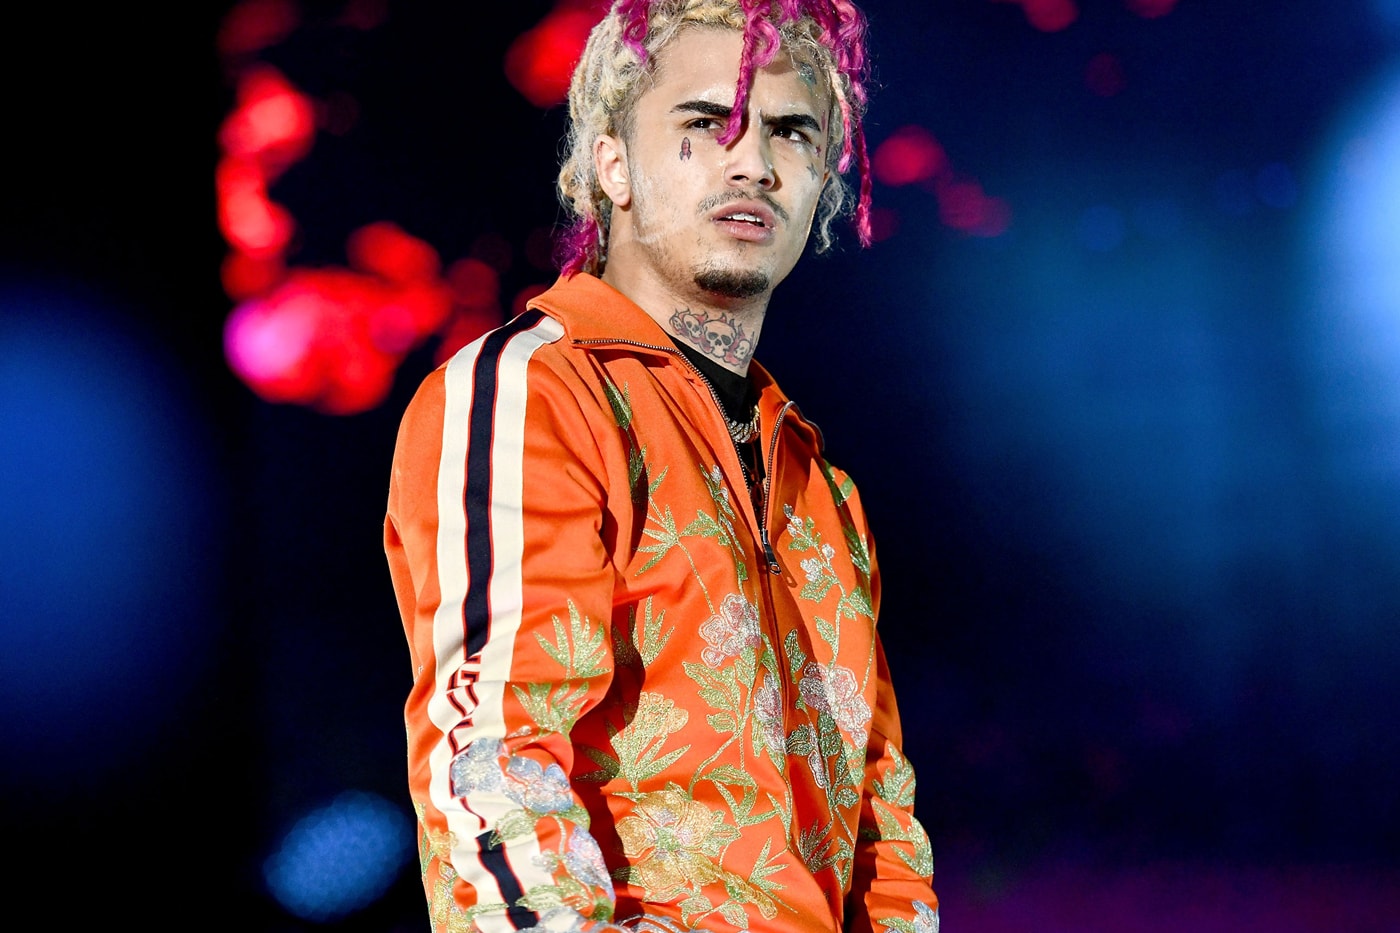 Lil Pump Gucci Gang Certified Platinum Recording Industry Association of America RIAA